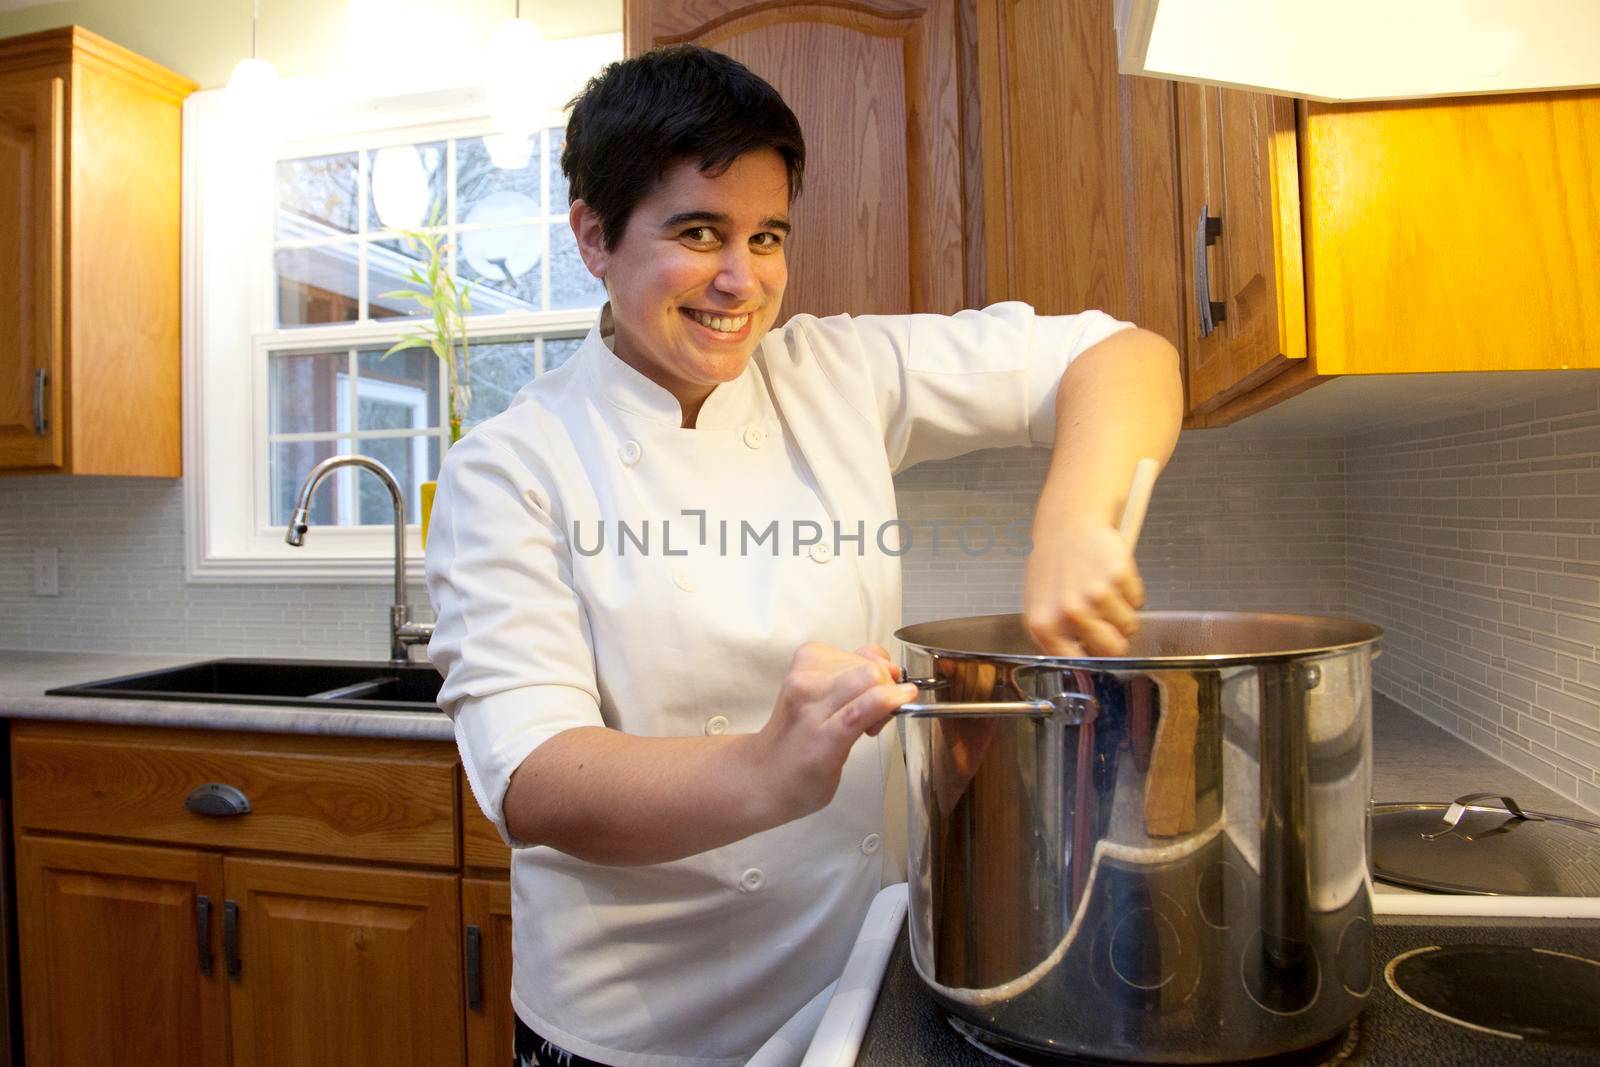  Person in a chef jacket stirs a huge vat of soup or stew with a wooden spoon over the stove 